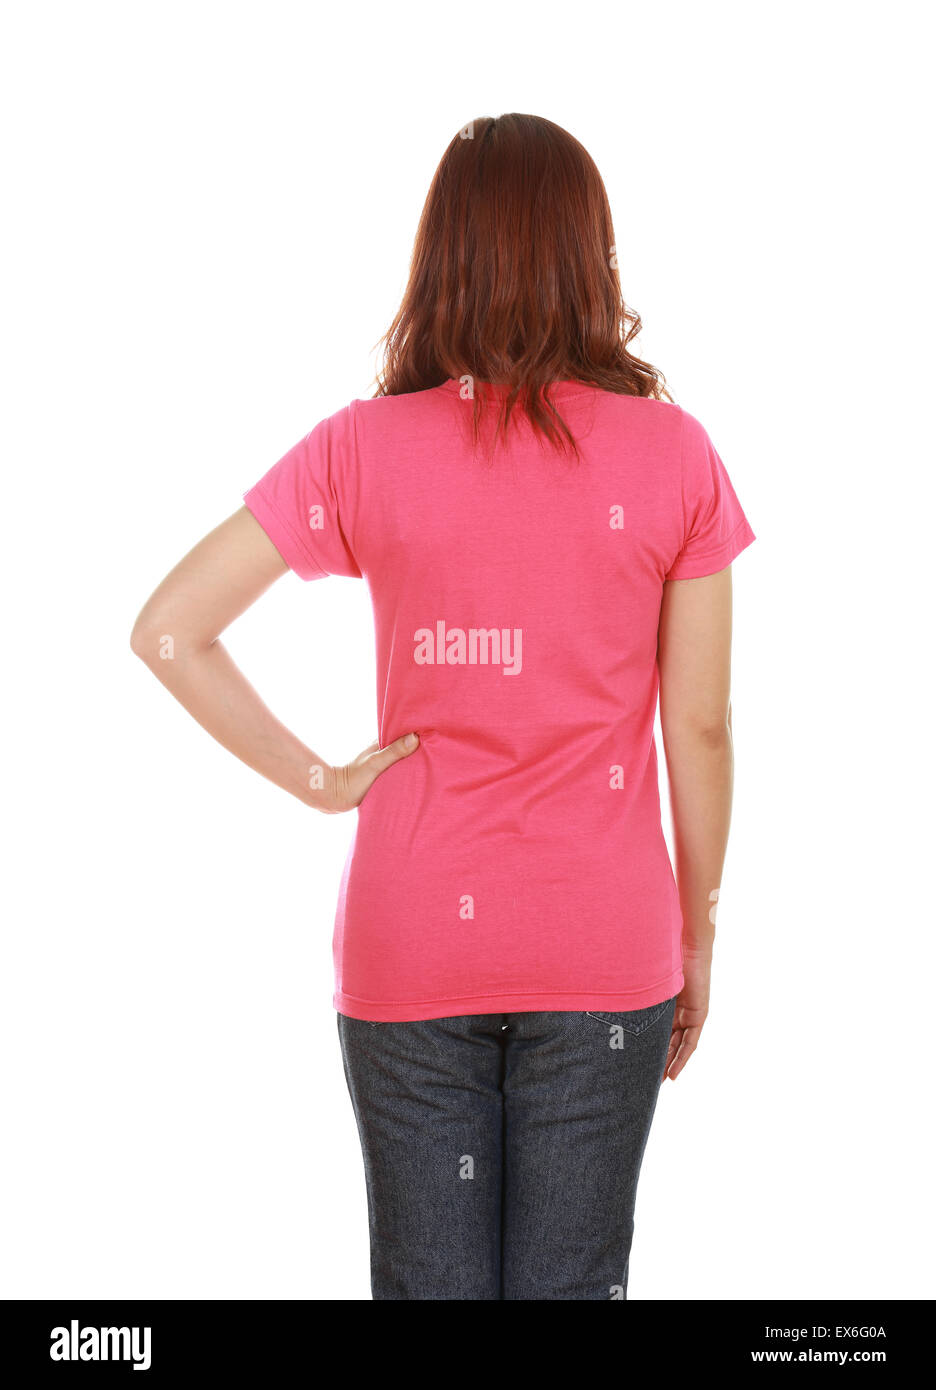 blank pink t shirt front and back